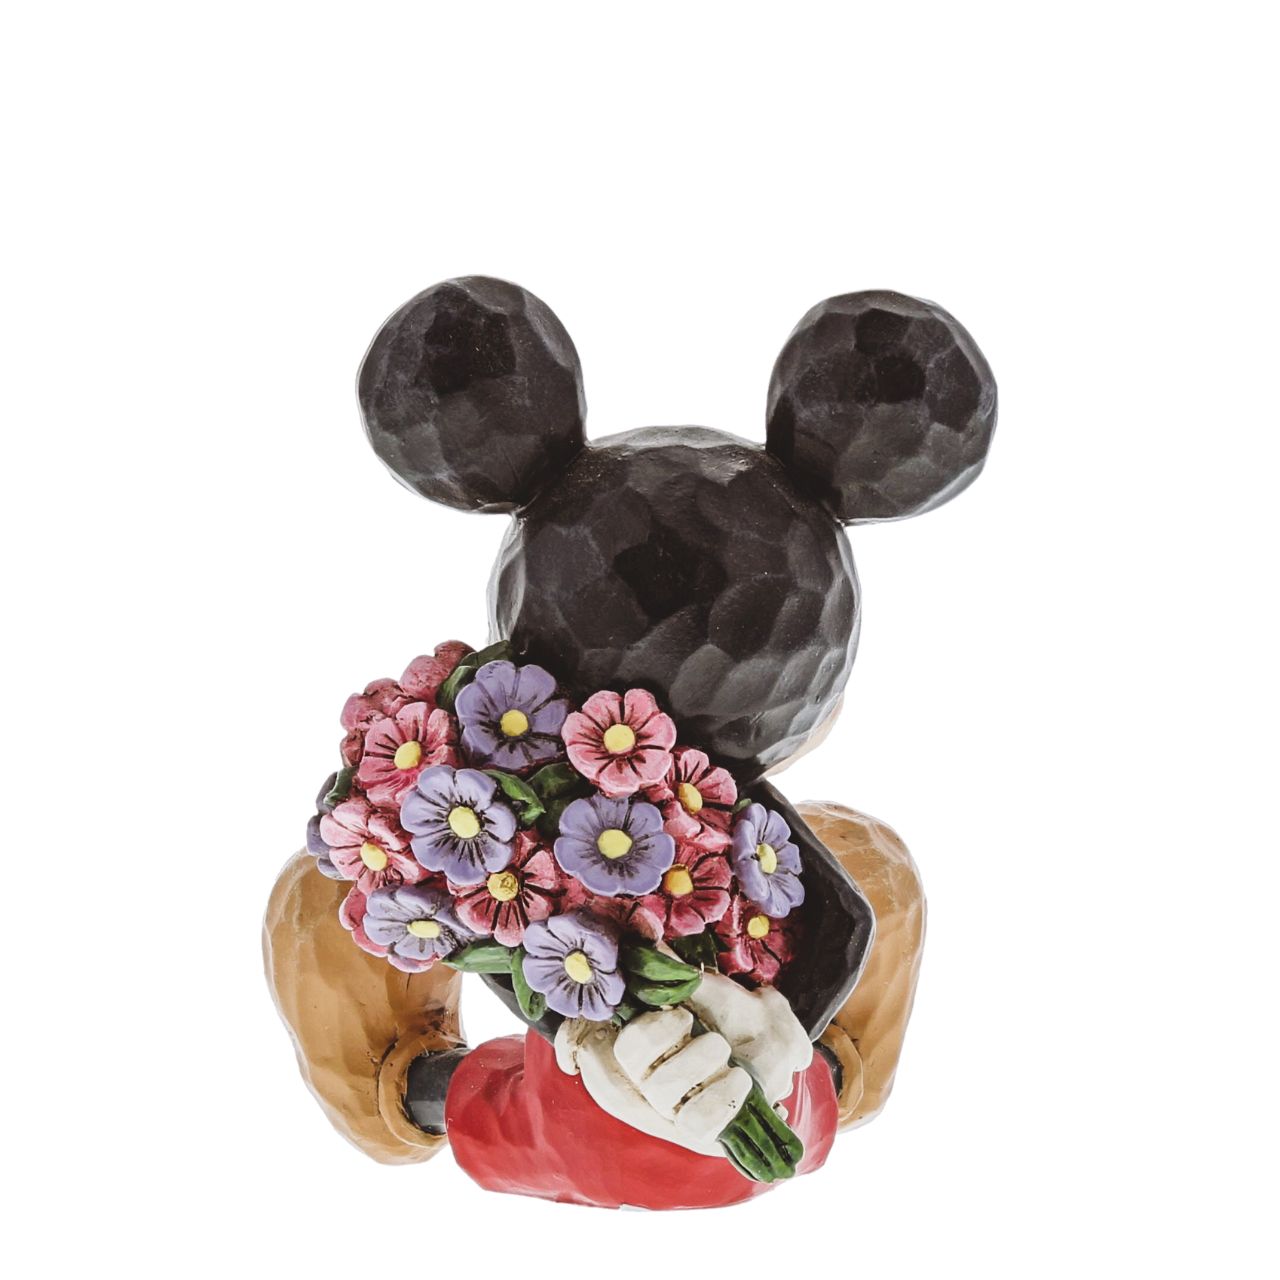 Mickey Mouse with Flowers by Jim Shore  Beautifully handcrafted and delightfully decorated in time-honoured folk art motifs, Jim Shore's charming miniatures capture the essence of beloved Disney characters. Mickey hides a bouquet behind his back in this whimsical, playfully romantic scene.